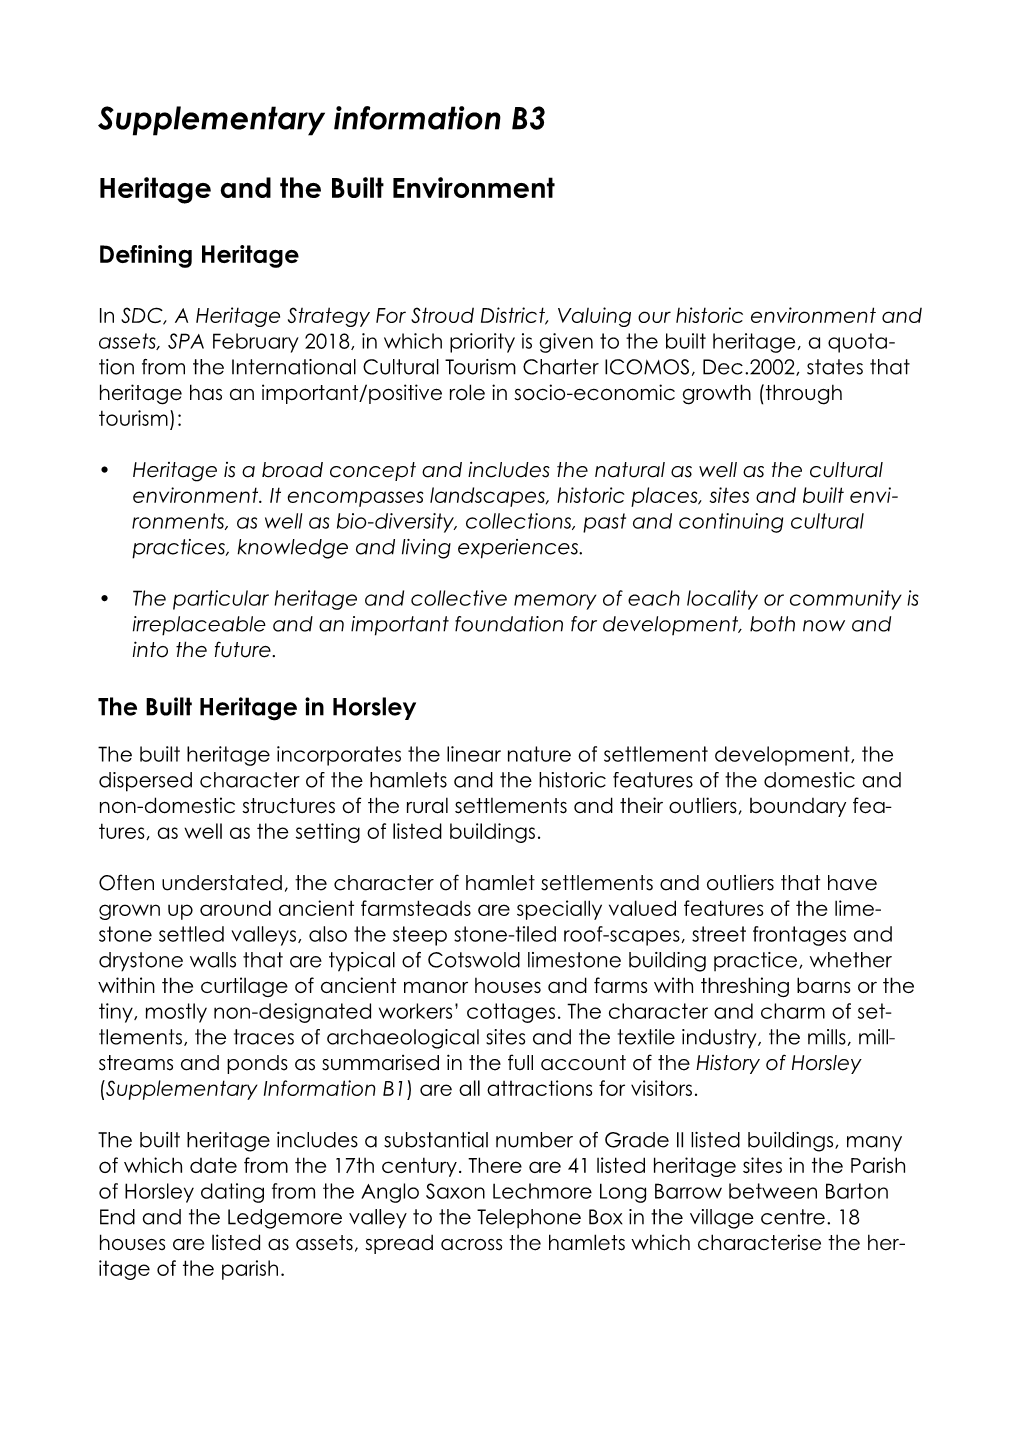 B 3 Heritage and the Built Environment